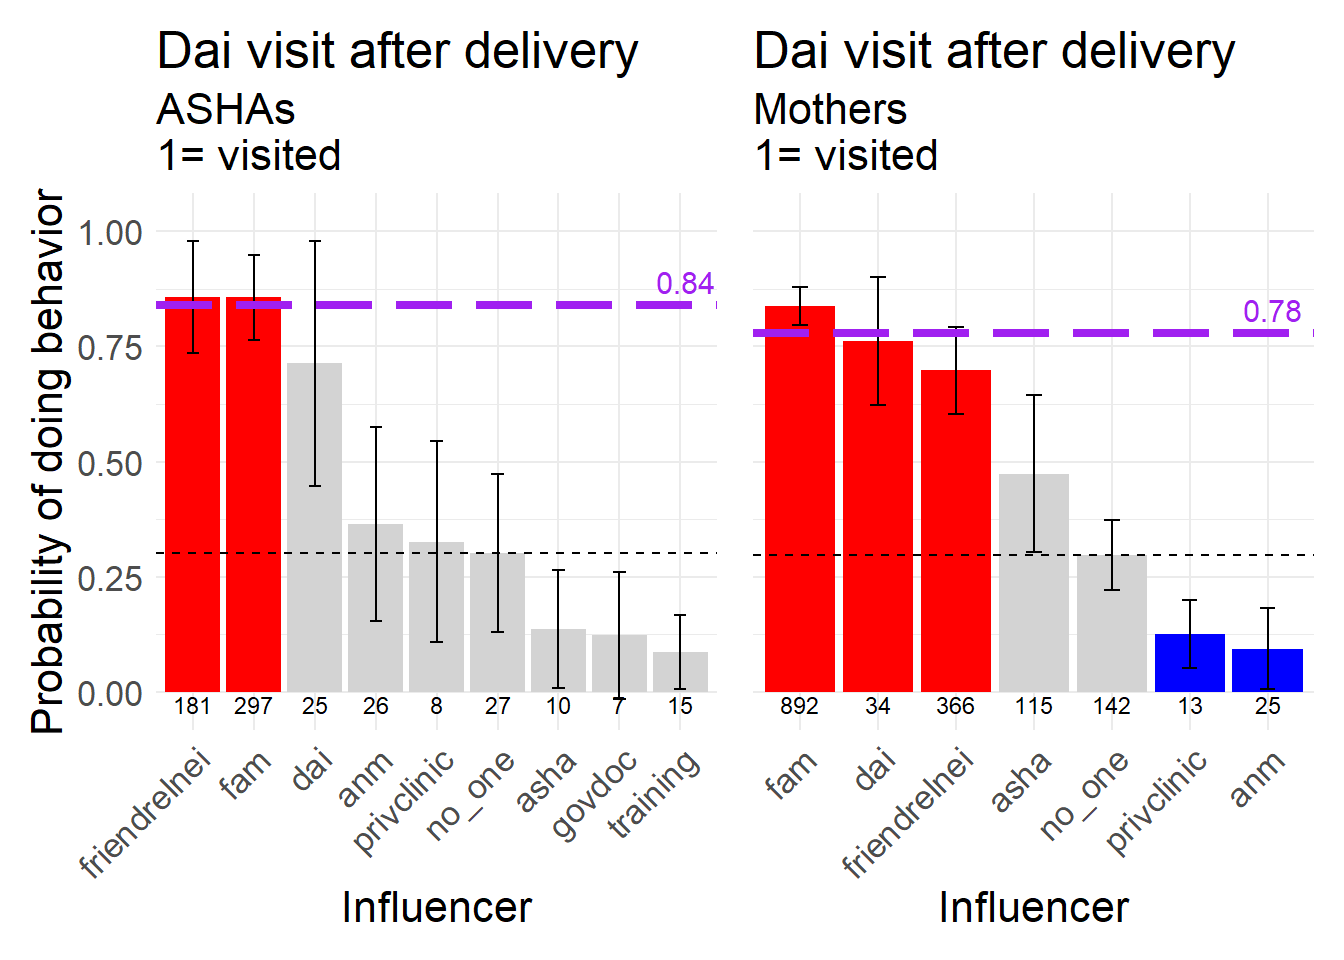 A visit from the Dai after delivery, a neutral behavior, 1 = dai visited.